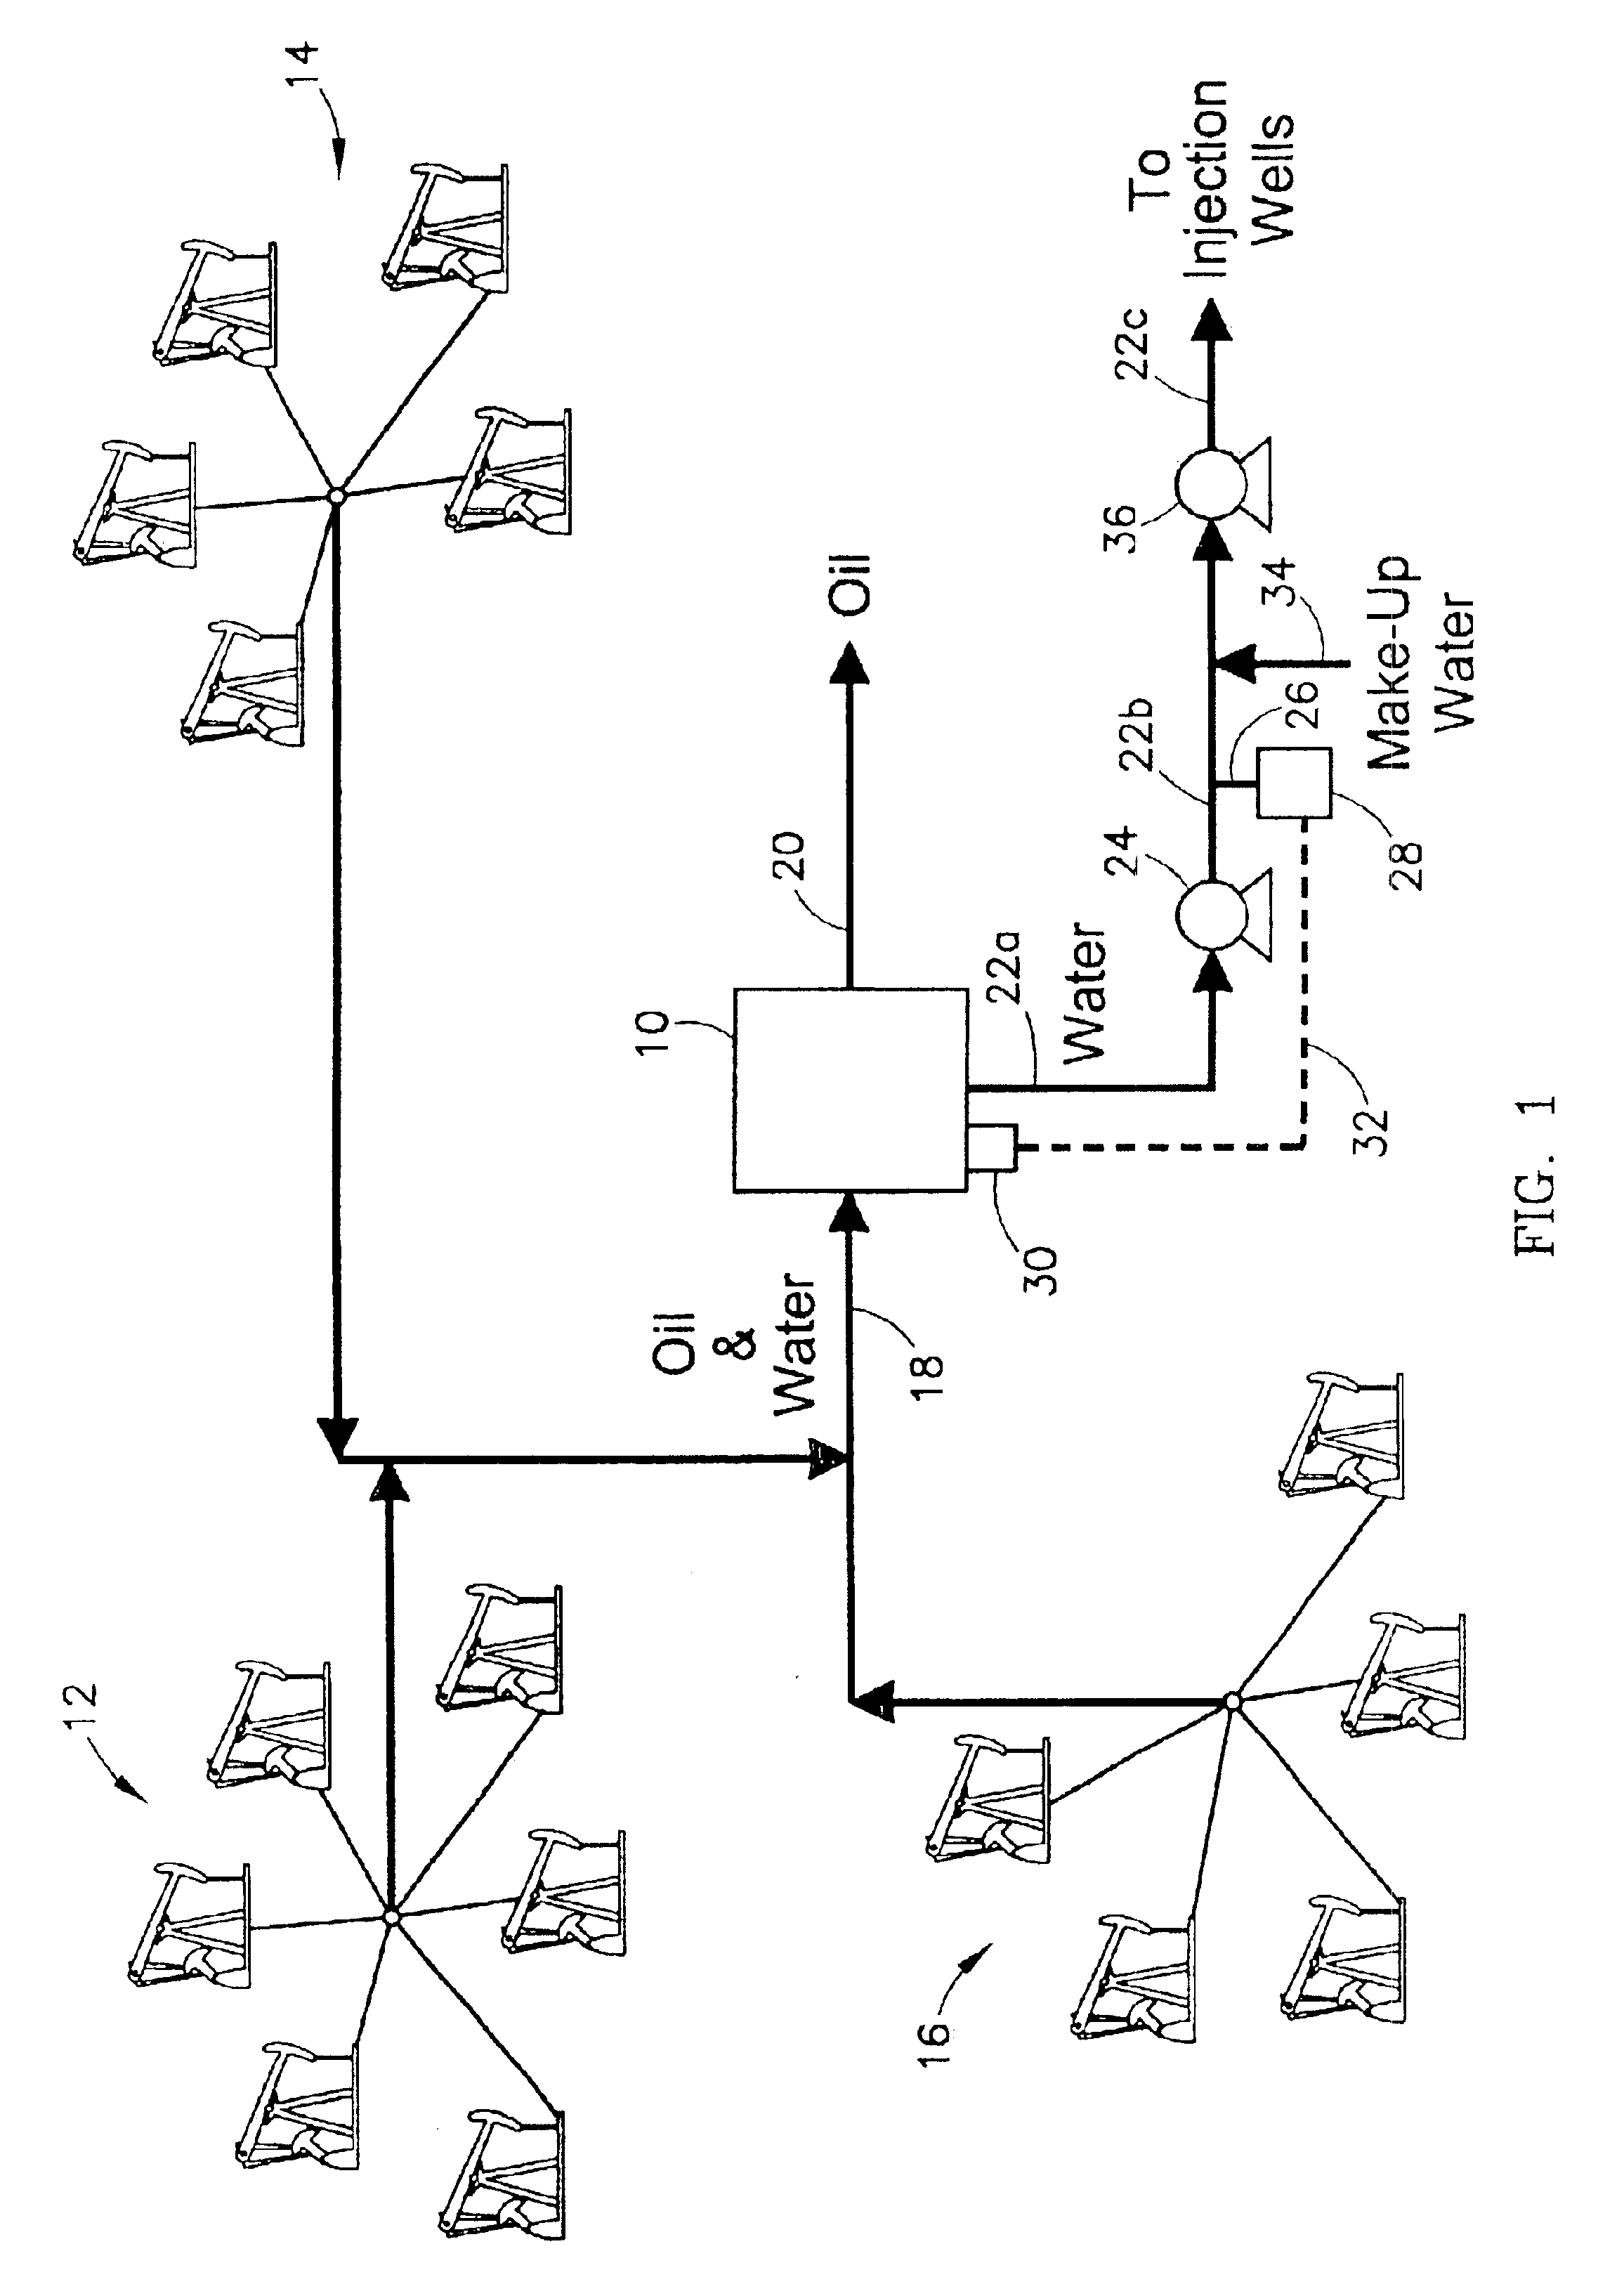 Oil field separation facility control system utilizing total organic carbon analyzer